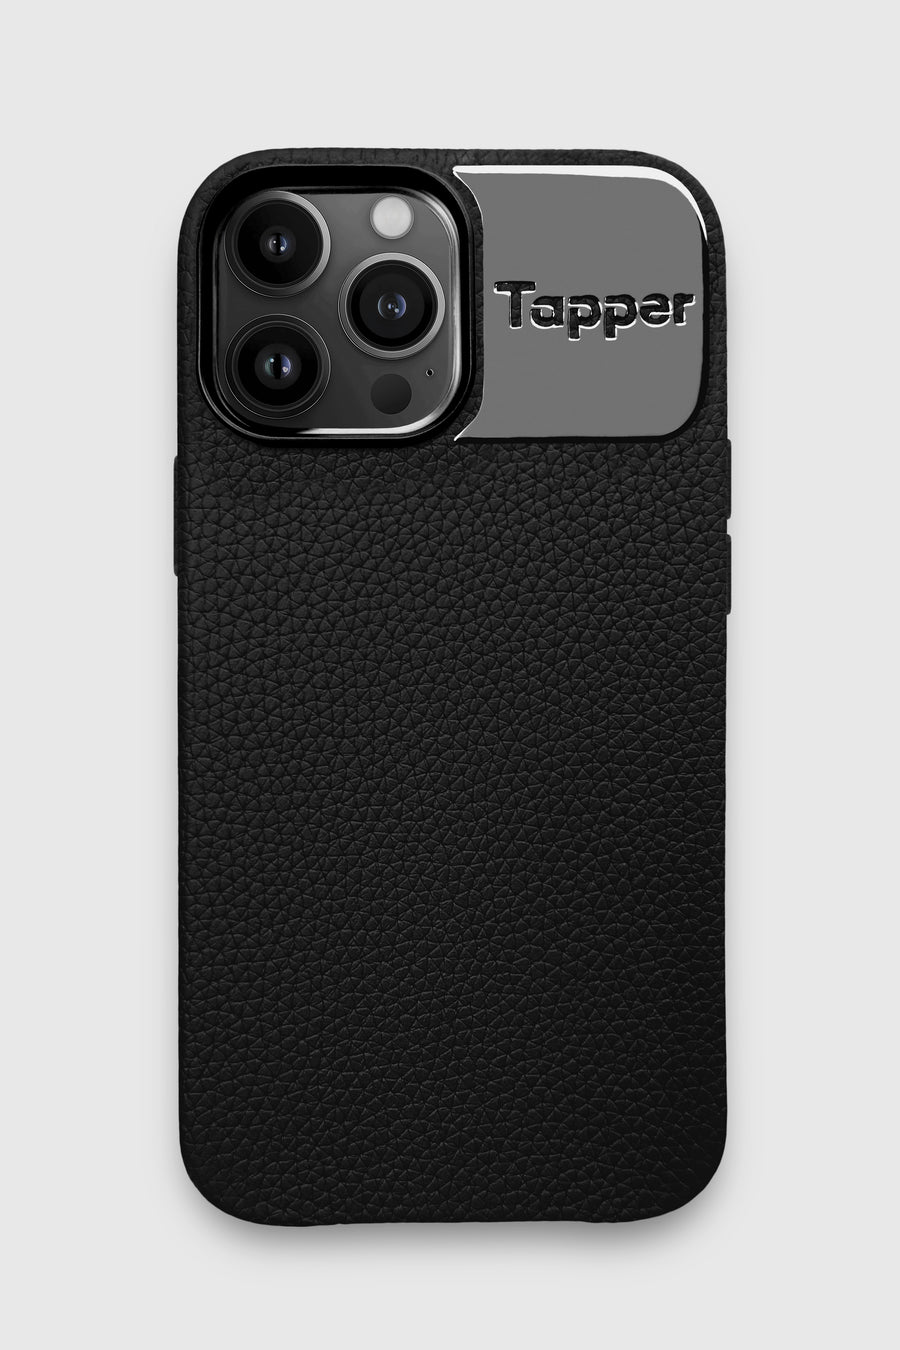 Tapper's luxurious black genuine cow leather iPhone 13 Pro Max case with MagSafe and a metal logo plate in hematite black plating that protects and elevates the look of your iPhone 13 Pro. The next must-have high end protective Apple iPhone accessory in real leather and precious metals. Designed in Sweden by Tapper. Free Express Shipping at gettapper.com